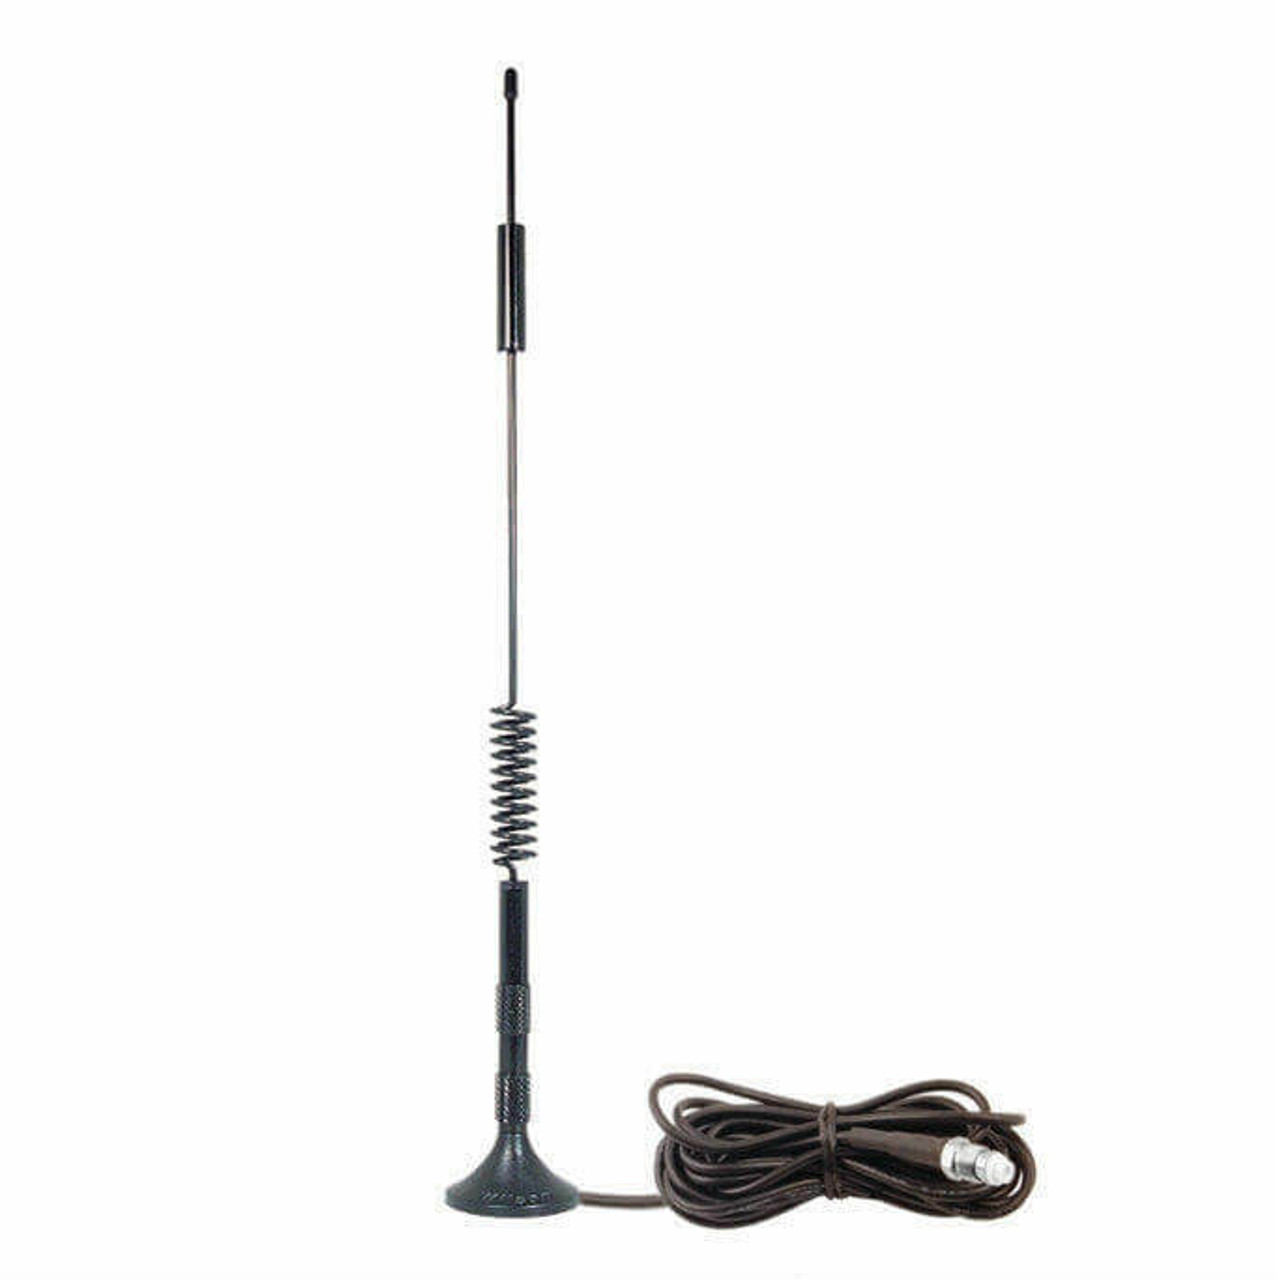 Wilson Electronics 12-inch Dual Band Magnet-Mount Antenna w/ FME Female Connector 